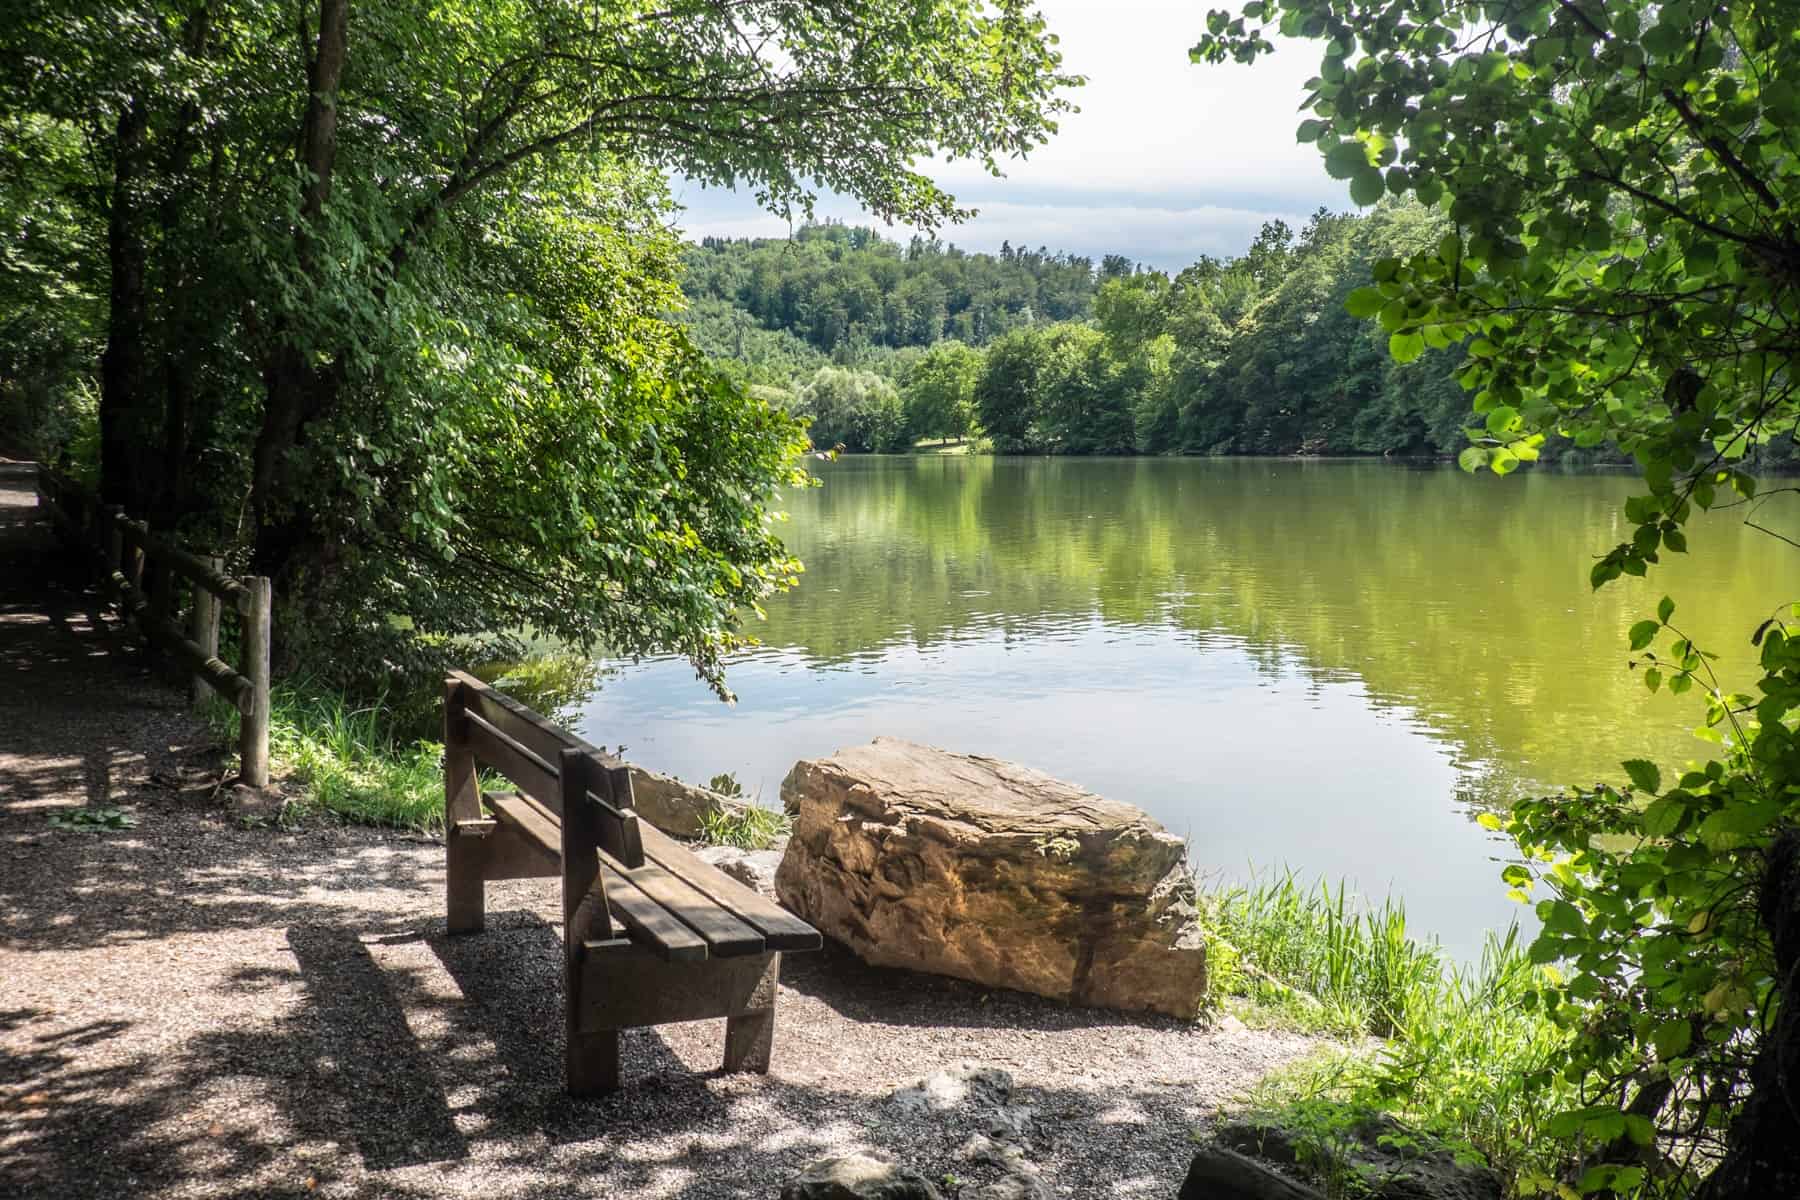 A bench next to the green tree-lined water of Thalersee Lake near Graz, Austria